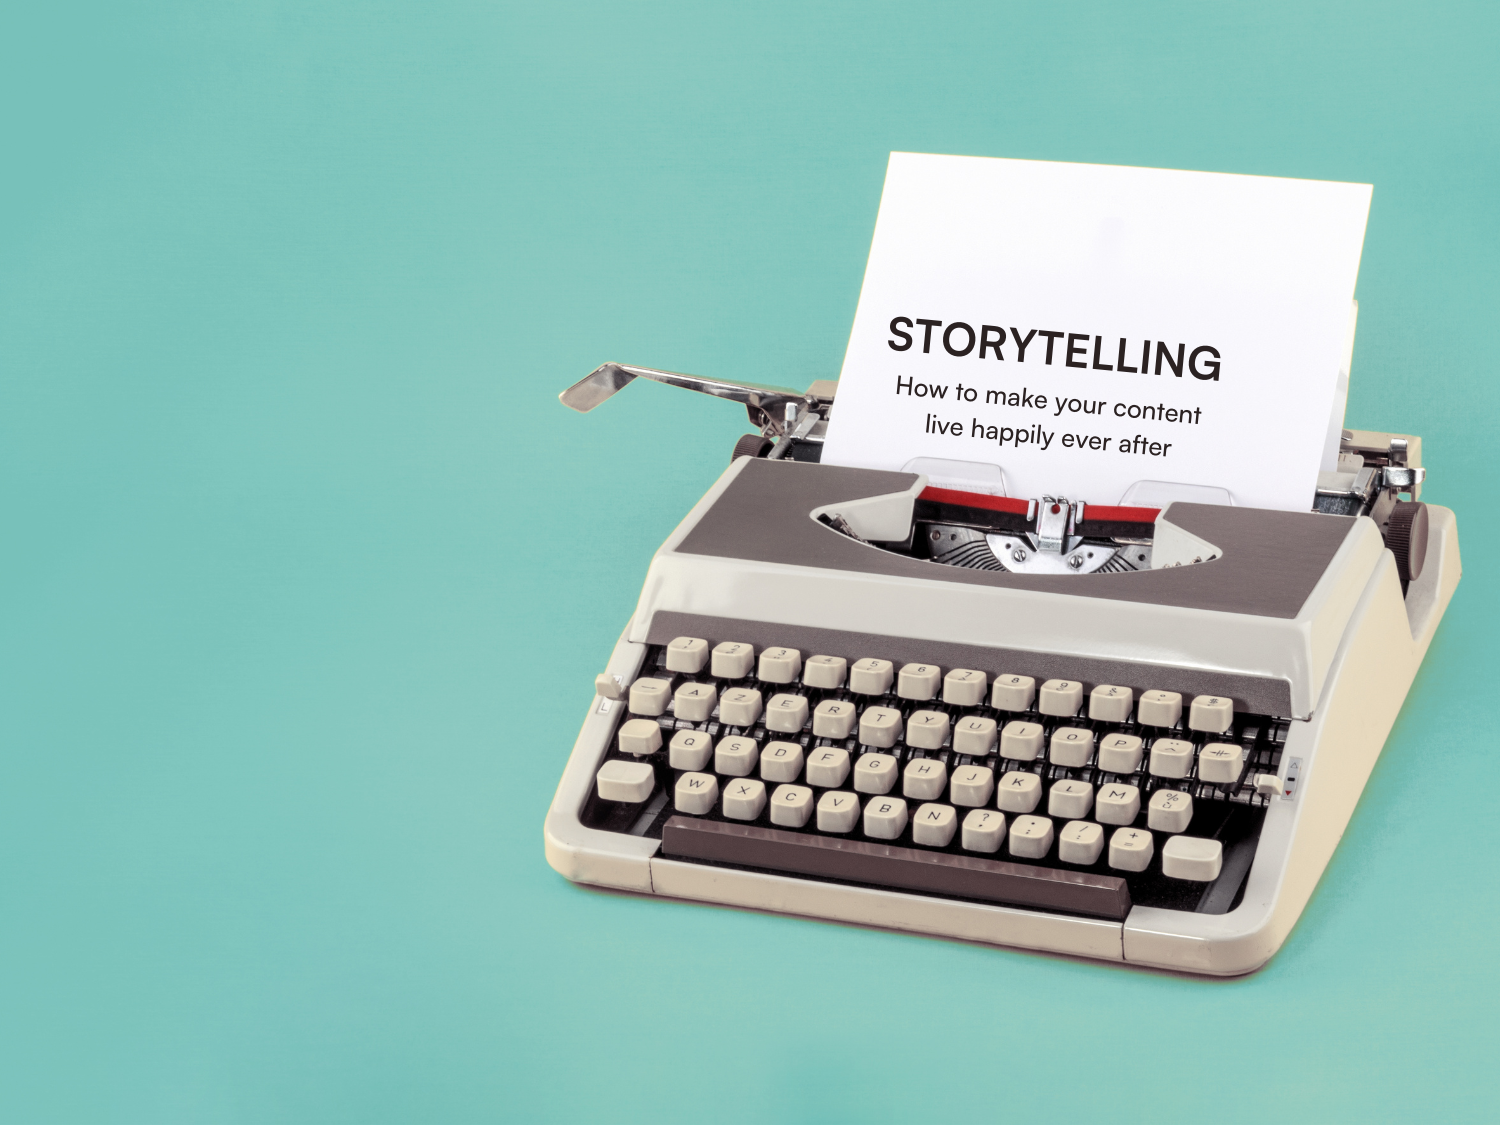 Get tips on how to use storytelling strategically in your marketing efforts.